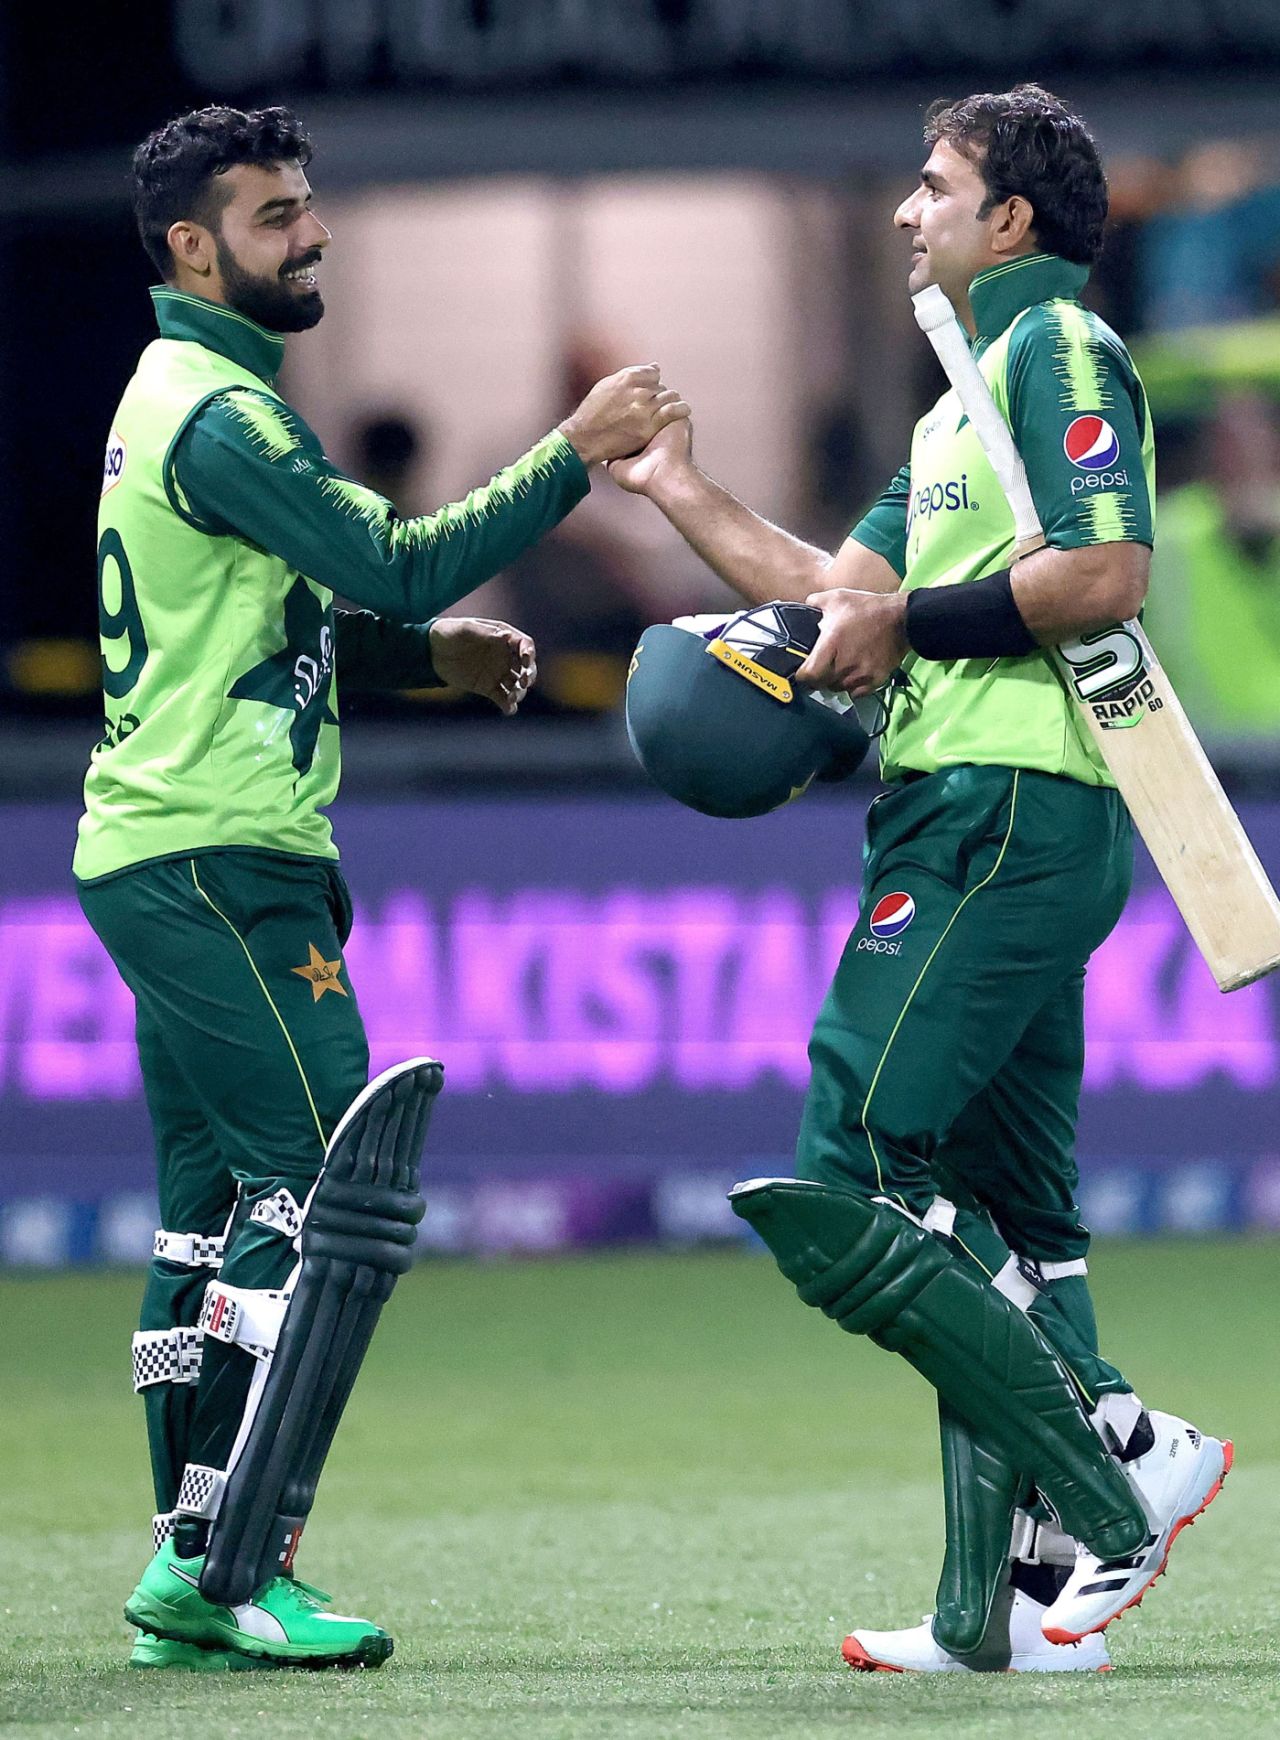 Iftikhar Ahmed is congratulated by his captain Shadab Khan after hitting the winning six, New Zealand vs Pakistan, 3rd T20I, Napier, December 22, 2020